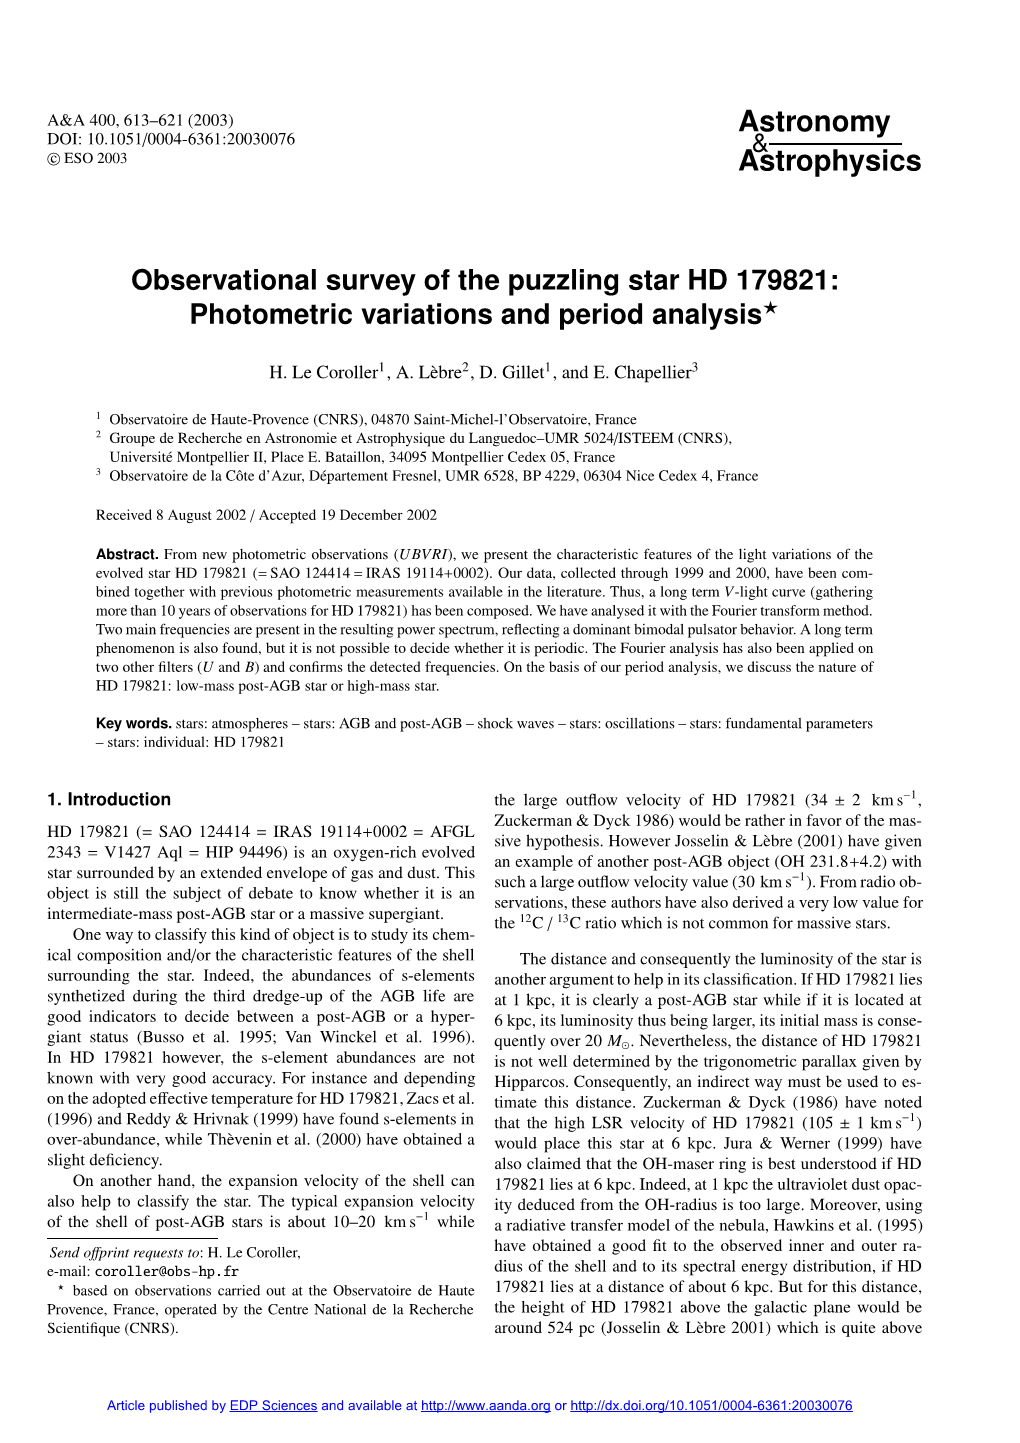 Observational Survey of the Puzzling Star HD 179821: Photometric Variations and Period Analysis?